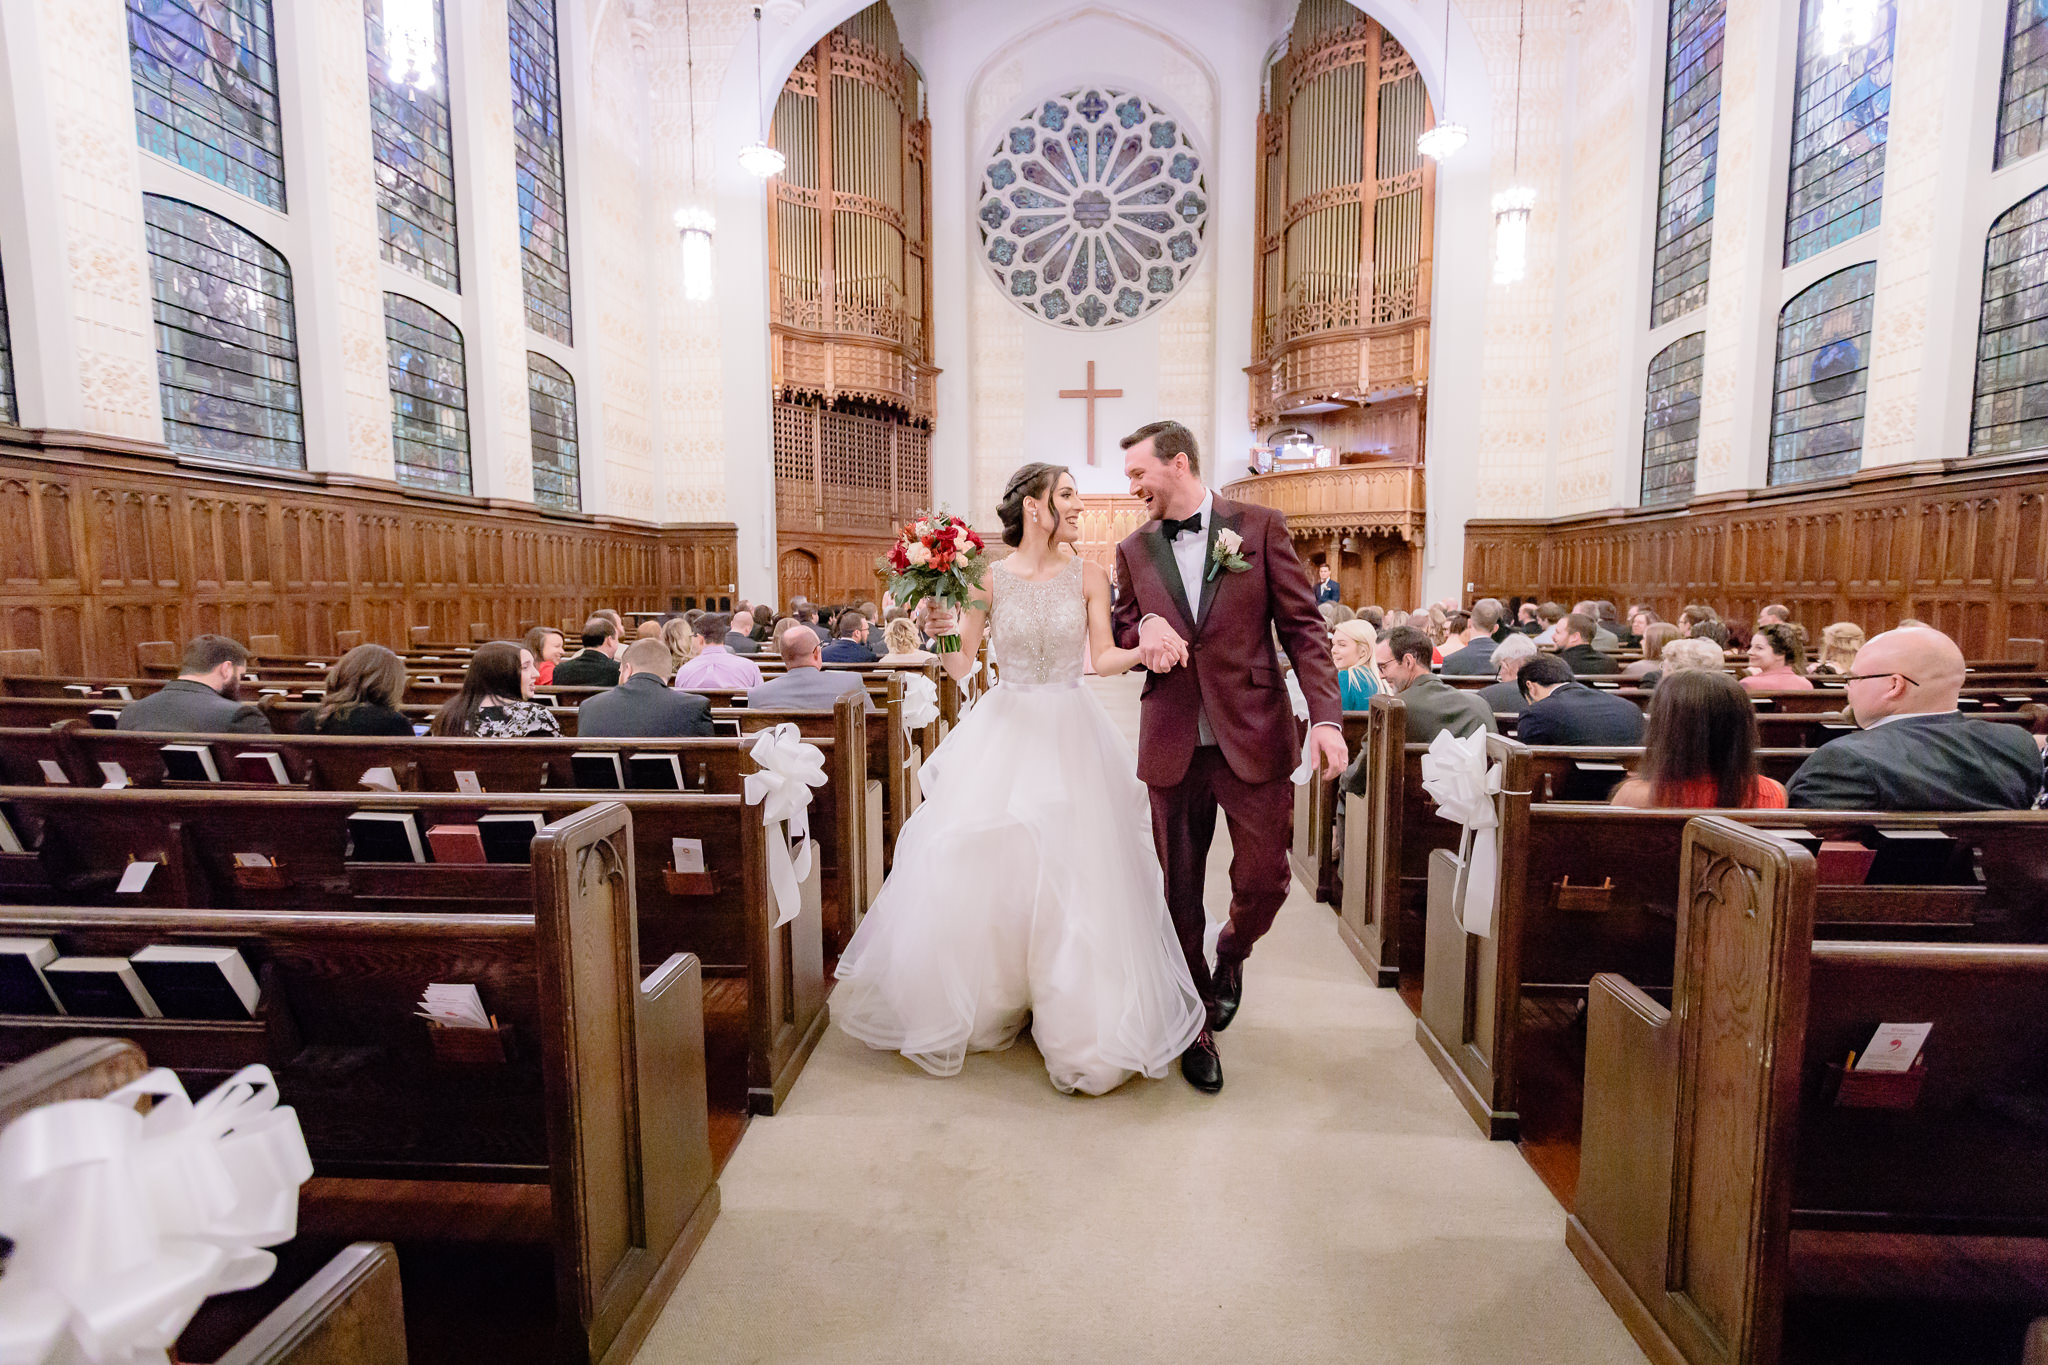 Newlyweds exit their wedding at the Smithfield United Church of Christ